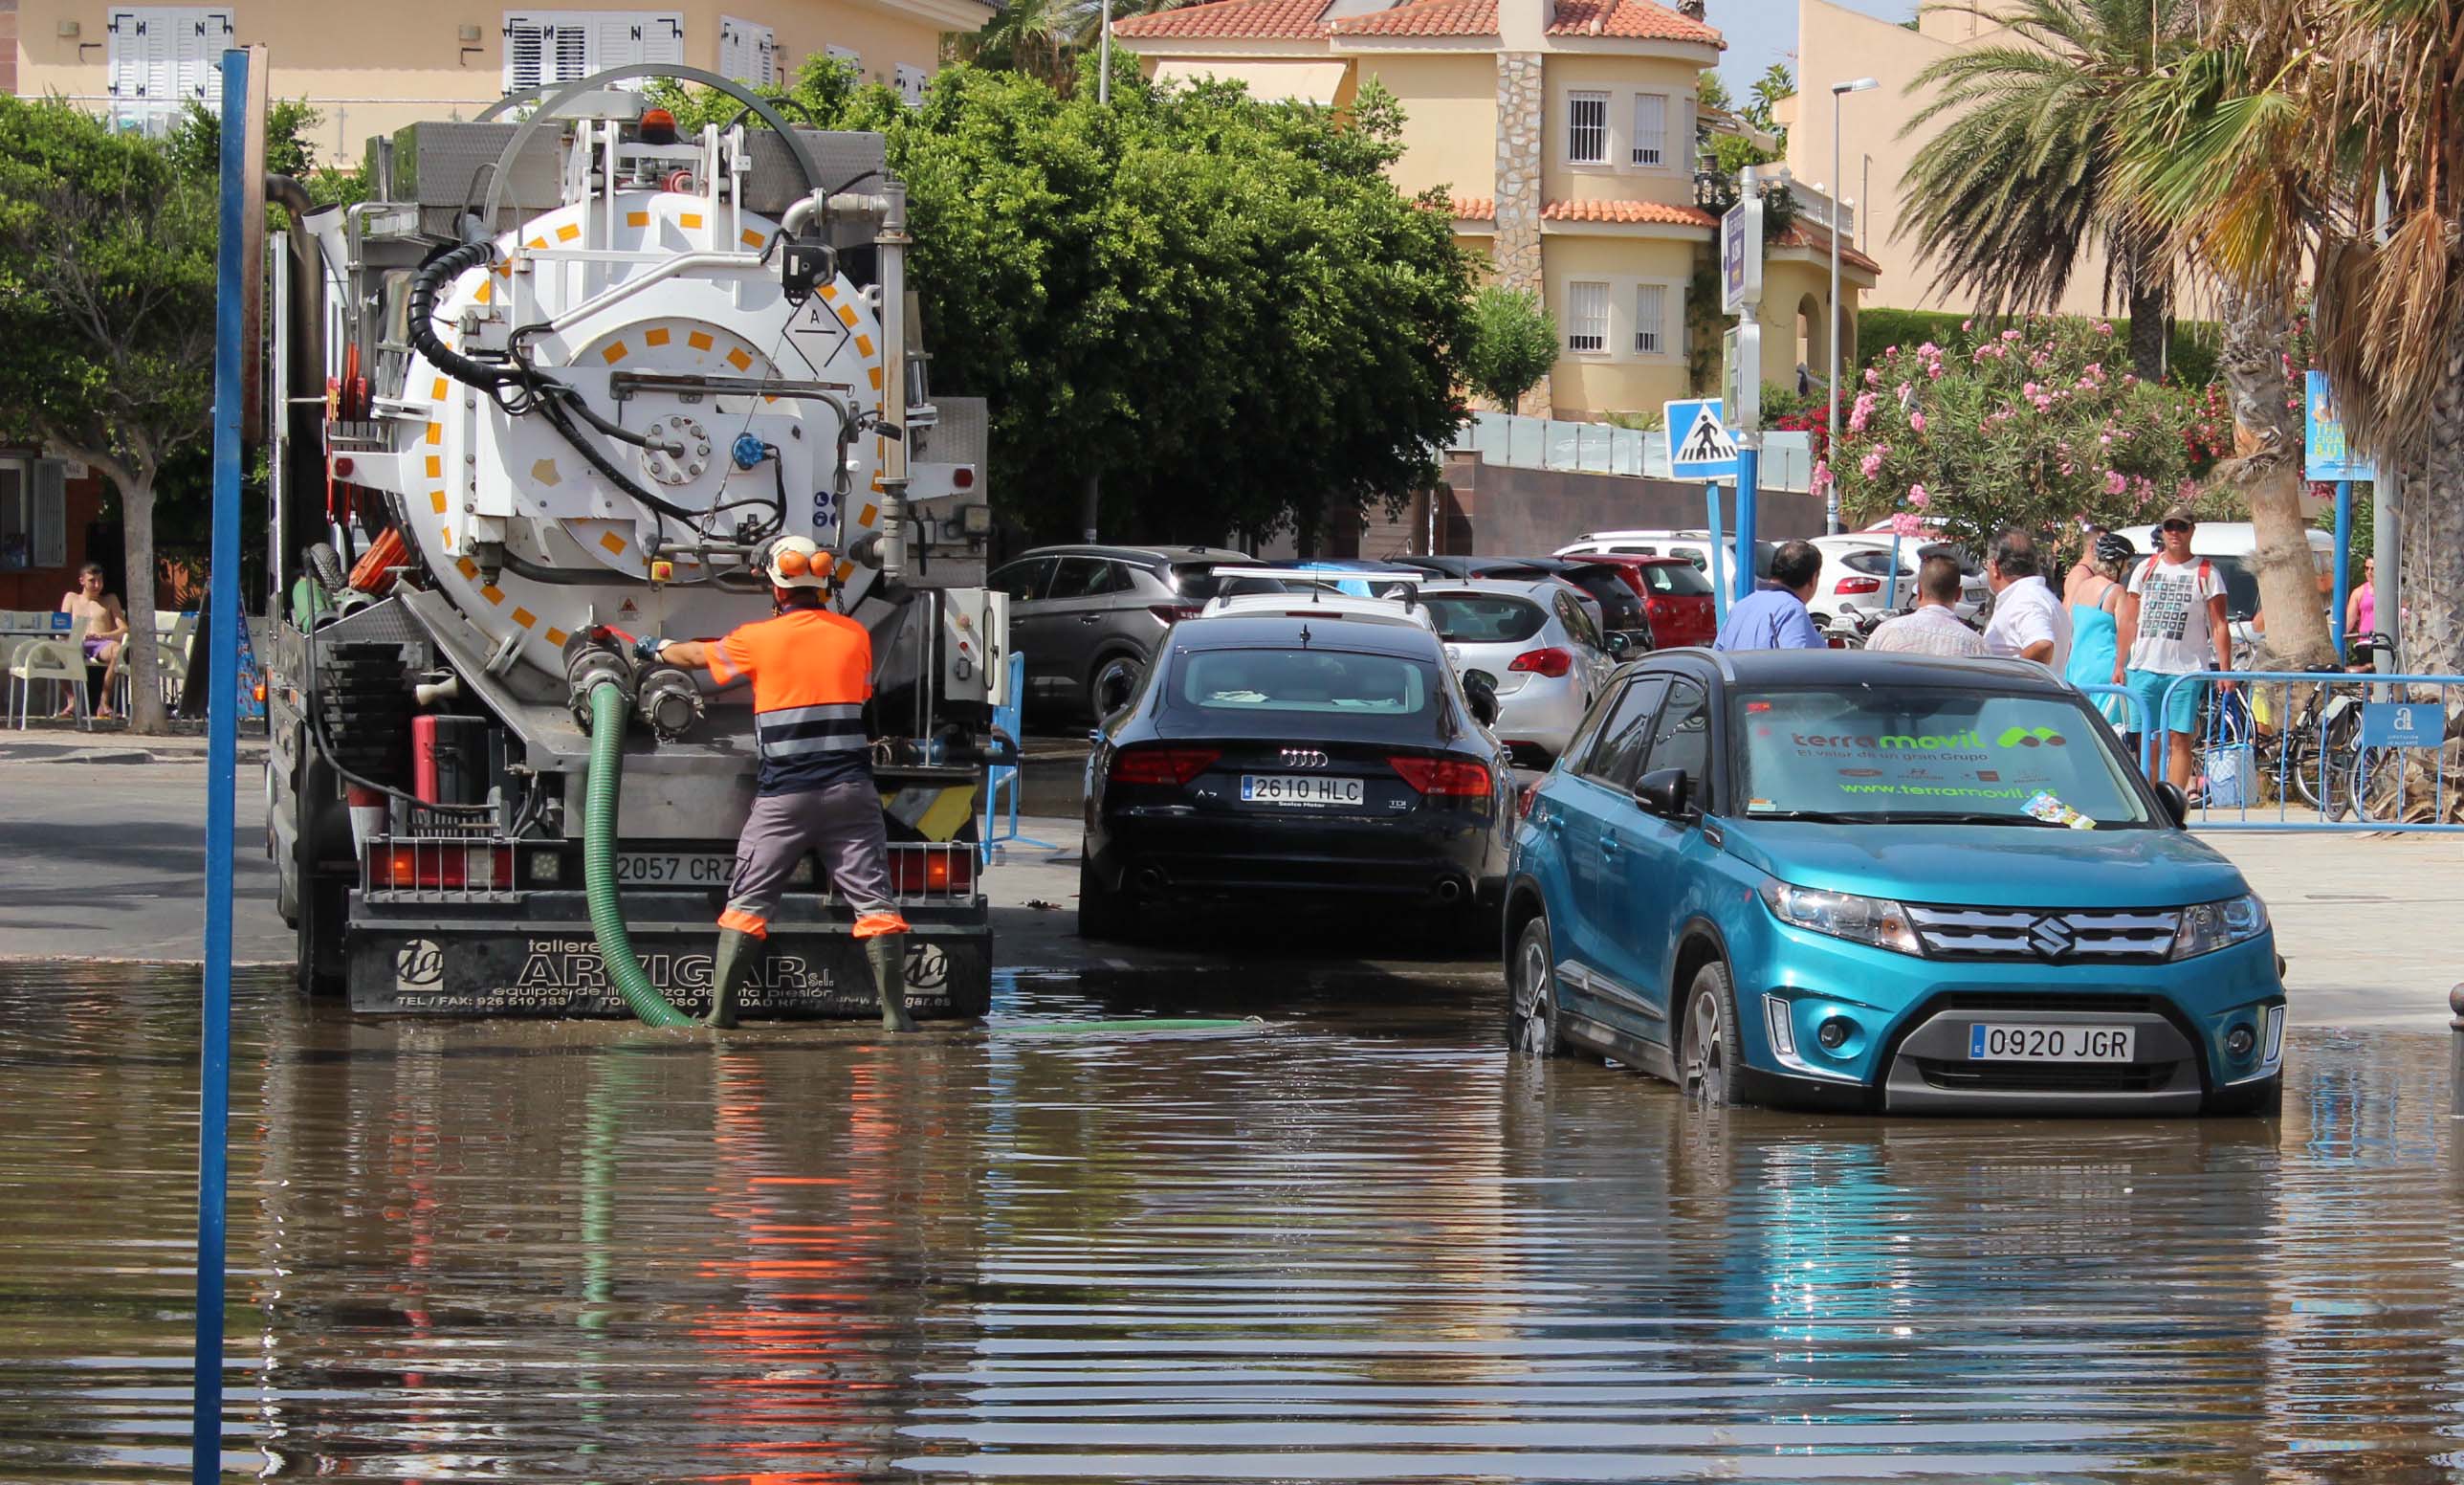 At La Zenia beach the sewage was almost 12 inches deep, 